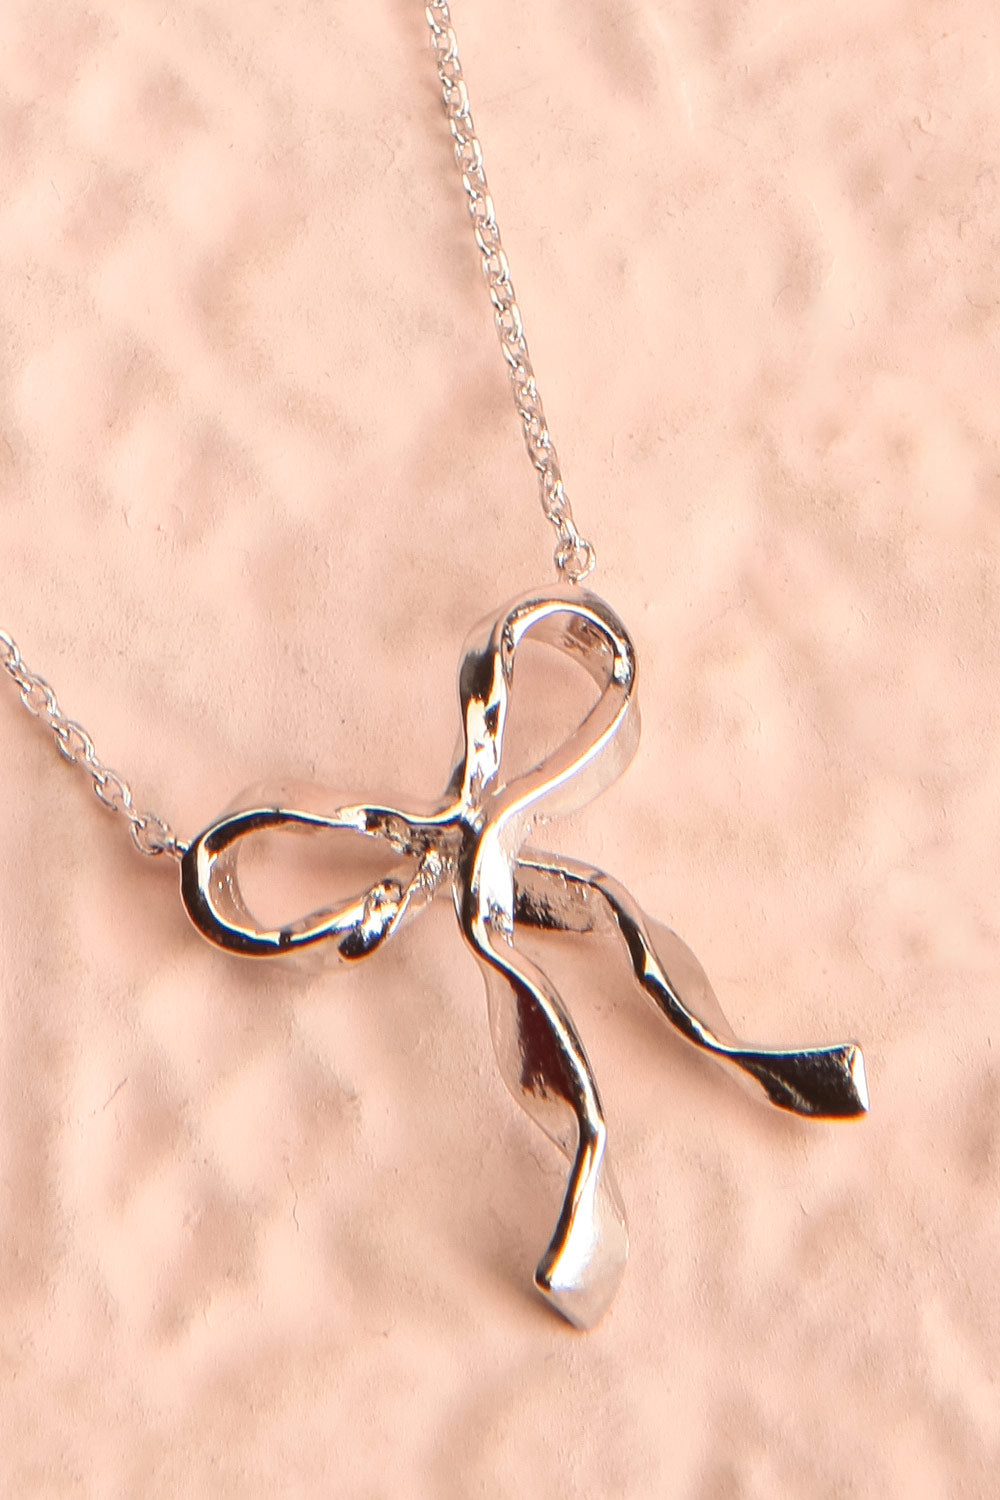 Triteia Silver Necklace w/ Bow Charm | Boutique 1861 flat close-up